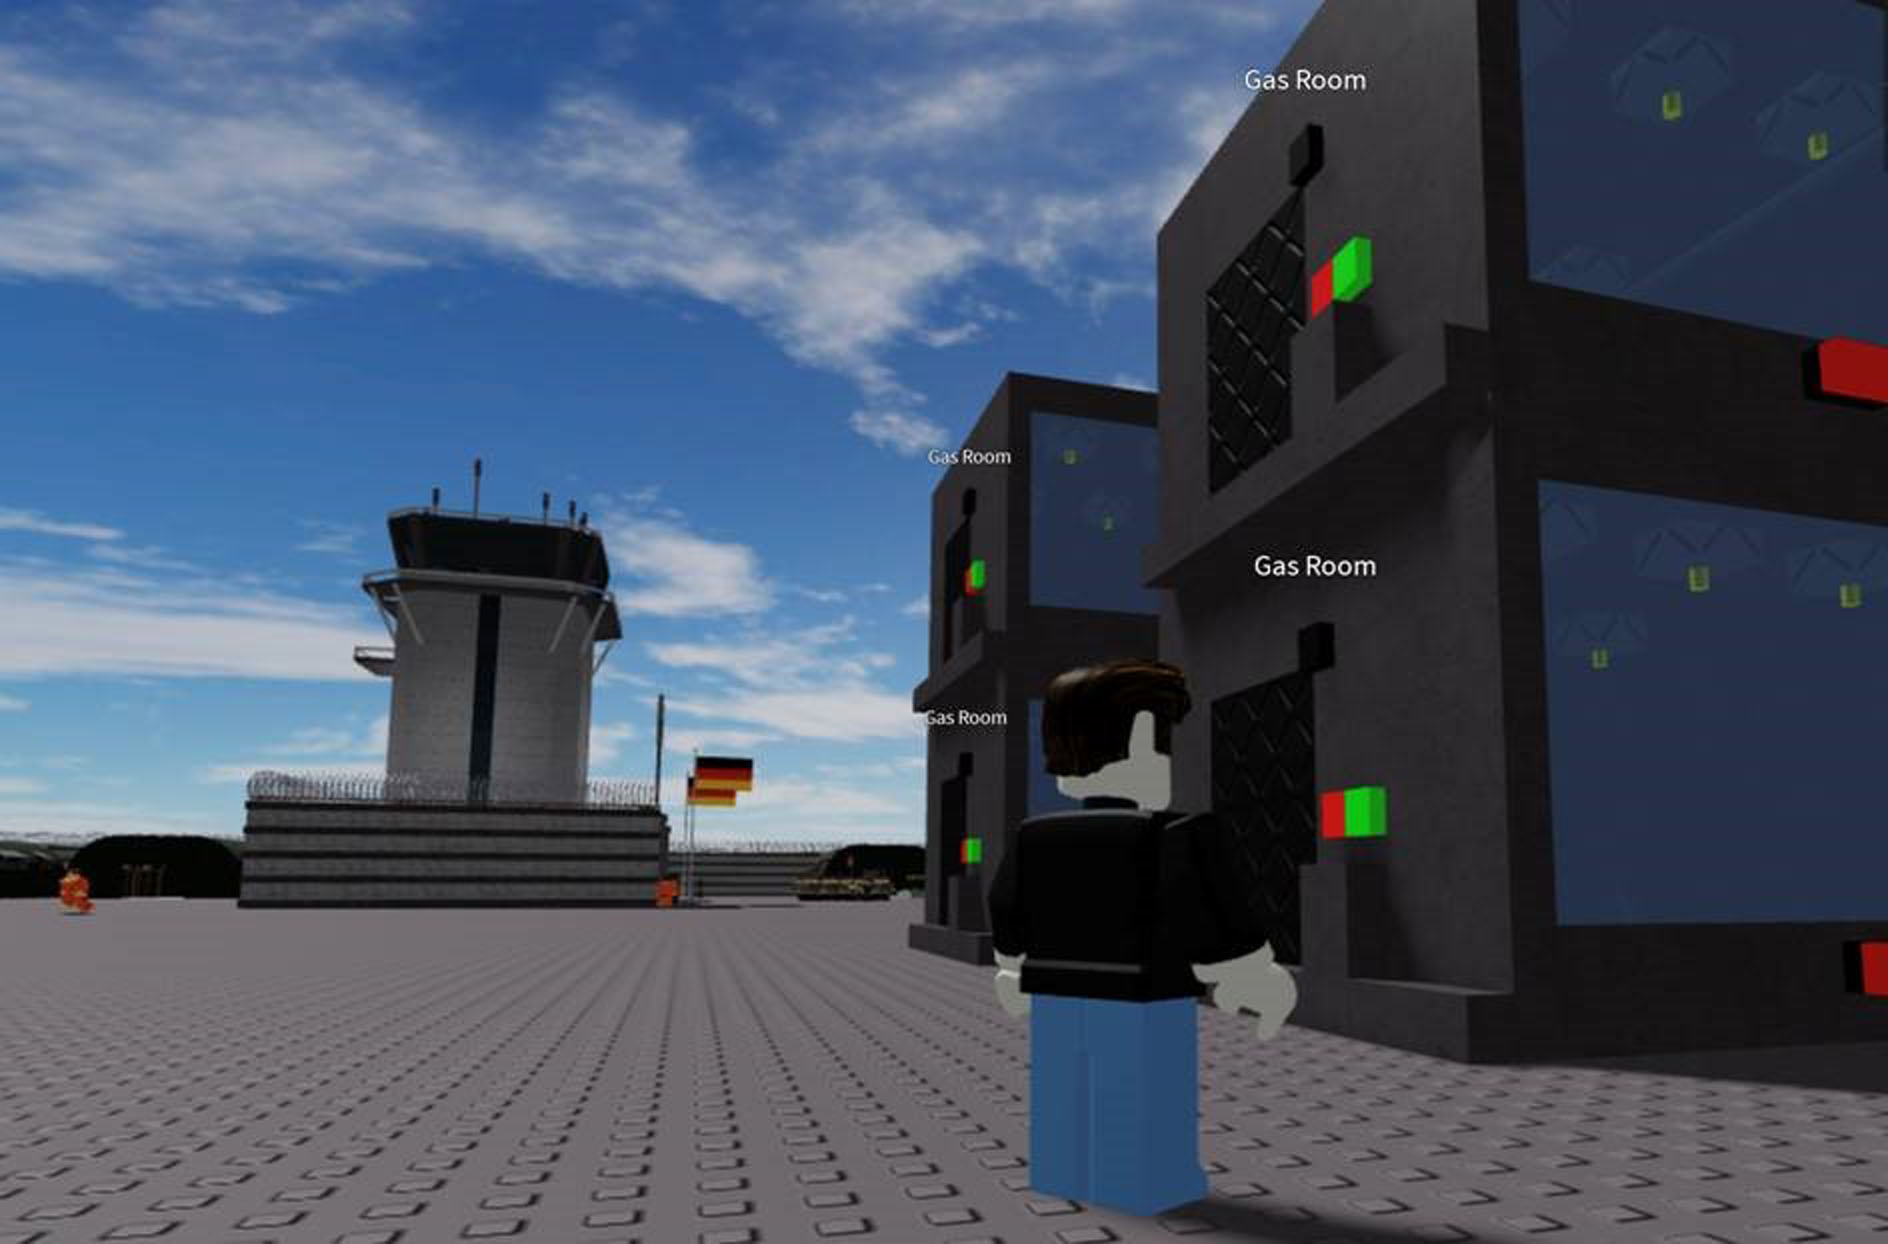 Roblox: the children's game platform with 'Nazi sex parties